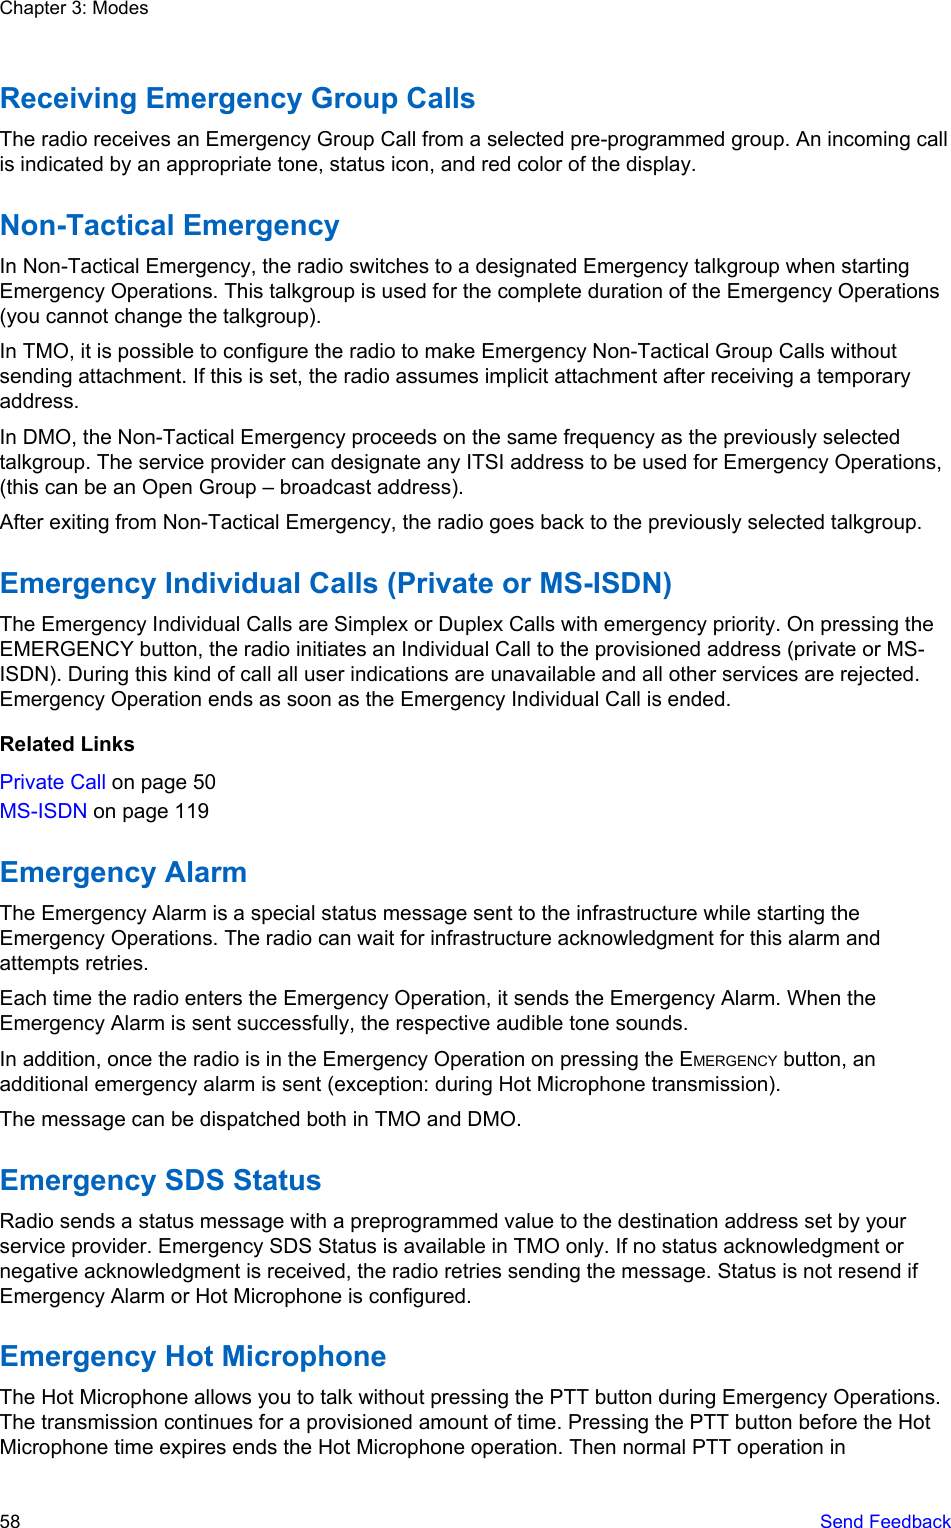 Receiving Emergency Group CallsThe radio receives an Emergency Group Call from a selected pre-programmed group. An incoming callis indicated by an appropriate tone, status icon, and red color of the display.Non-Tactical EmergencyIn Non-Tactical Emergency, the radio switches to a designated Emergency talkgroup when startingEmergency Operations. This talkgroup is used for the complete duration of the Emergency Operations(you cannot change the talkgroup).In TMO, it is possible to configure the radio to make Emergency Non-Tactical Group Calls withoutsending attachment. If this is set, the radio assumes implicit attachment after receiving a temporaryaddress.In DMO, the Non-Tactical Emergency proceeds on the same frequency as the previously selectedtalkgroup. The service provider can designate any ITSI address to be used for Emergency Operations,(this can be an Open Group – broadcast address).After exiting from Non-Tactical Emergency, the radio goes back to the previously selected talkgroup.Emergency Individual Calls (Private or MS-ISDN)The Emergency Individual Calls are Simplex or Duplex Calls with emergency priority. On pressing theEMERGENCY button, the radio initiates an Individual Call to the provisioned address (private or MS-ISDN). During this kind of call all user indications are unavailable and all other services are rejected.Emergency Operation ends as soon as the Emergency Individual Call is ended.Related LinksPrivate Call on page 50MS-ISDN on page 119Emergency AlarmThe Emergency Alarm is a special status message sent to the infrastructure while starting theEmergency Operations. The radio can wait for infrastructure acknowledgment for this alarm andattempts retries.Each time the radio enters the Emergency Operation, it sends the Emergency Alarm. When theEmergency Alarm is sent successfully, the respective audible tone sounds.In addition, once the radio is in the Emergency Operation on pressing the EMERGENCY button, anadditional emergency alarm is sent (exception: during Hot Microphone transmission).The message can be dispatched both in TMO and DMO.Emergency SDS StatusRadio sends a status message with a preprogrammed value to the destination address set by yourservice provider. Emergency SDS Status is available in TMO only. If no status acknowledgment ornegative acknowledgment is received, the radio retries sending the message. Status is not resend ifEmergency Alarm or Hot Microphone is configured.Emergency Hot MicrophoneThe Hot Microphone allows you to talk without pressing the PTT button during Emergency Operations.The transmission continues for a provisioned amount of time. Pressing the PTT button before the HotMicrophone time expires ends the Hot Microphone operation. Then normal PTT operation inChapter 3: Modes58   Send Feedback